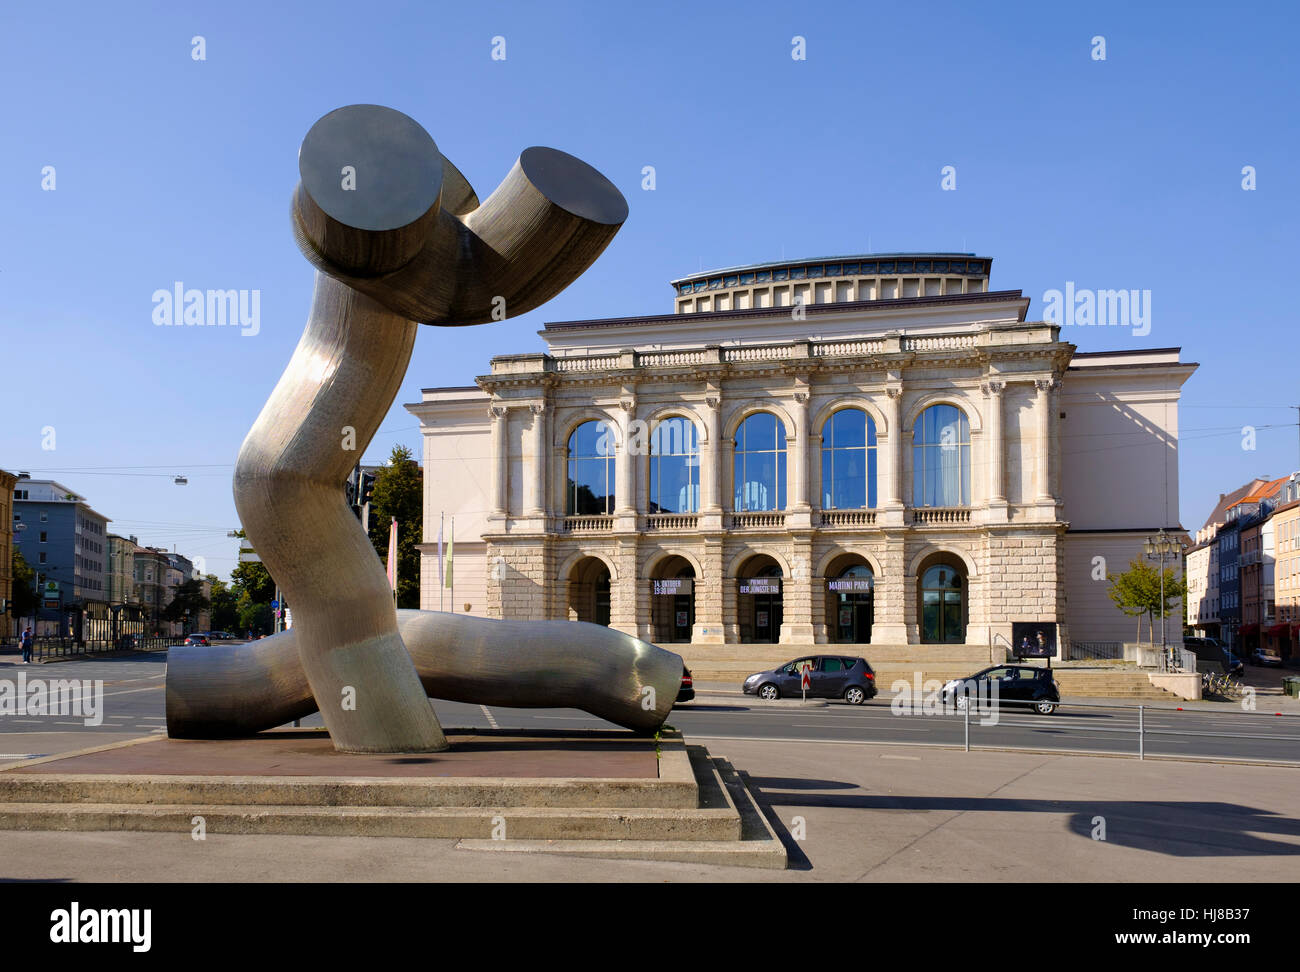 Theater Augsburg and Sculpture Ostern, Kennedy Square, Augsburg, Swabia, Bavaria, Germany Stock Photo